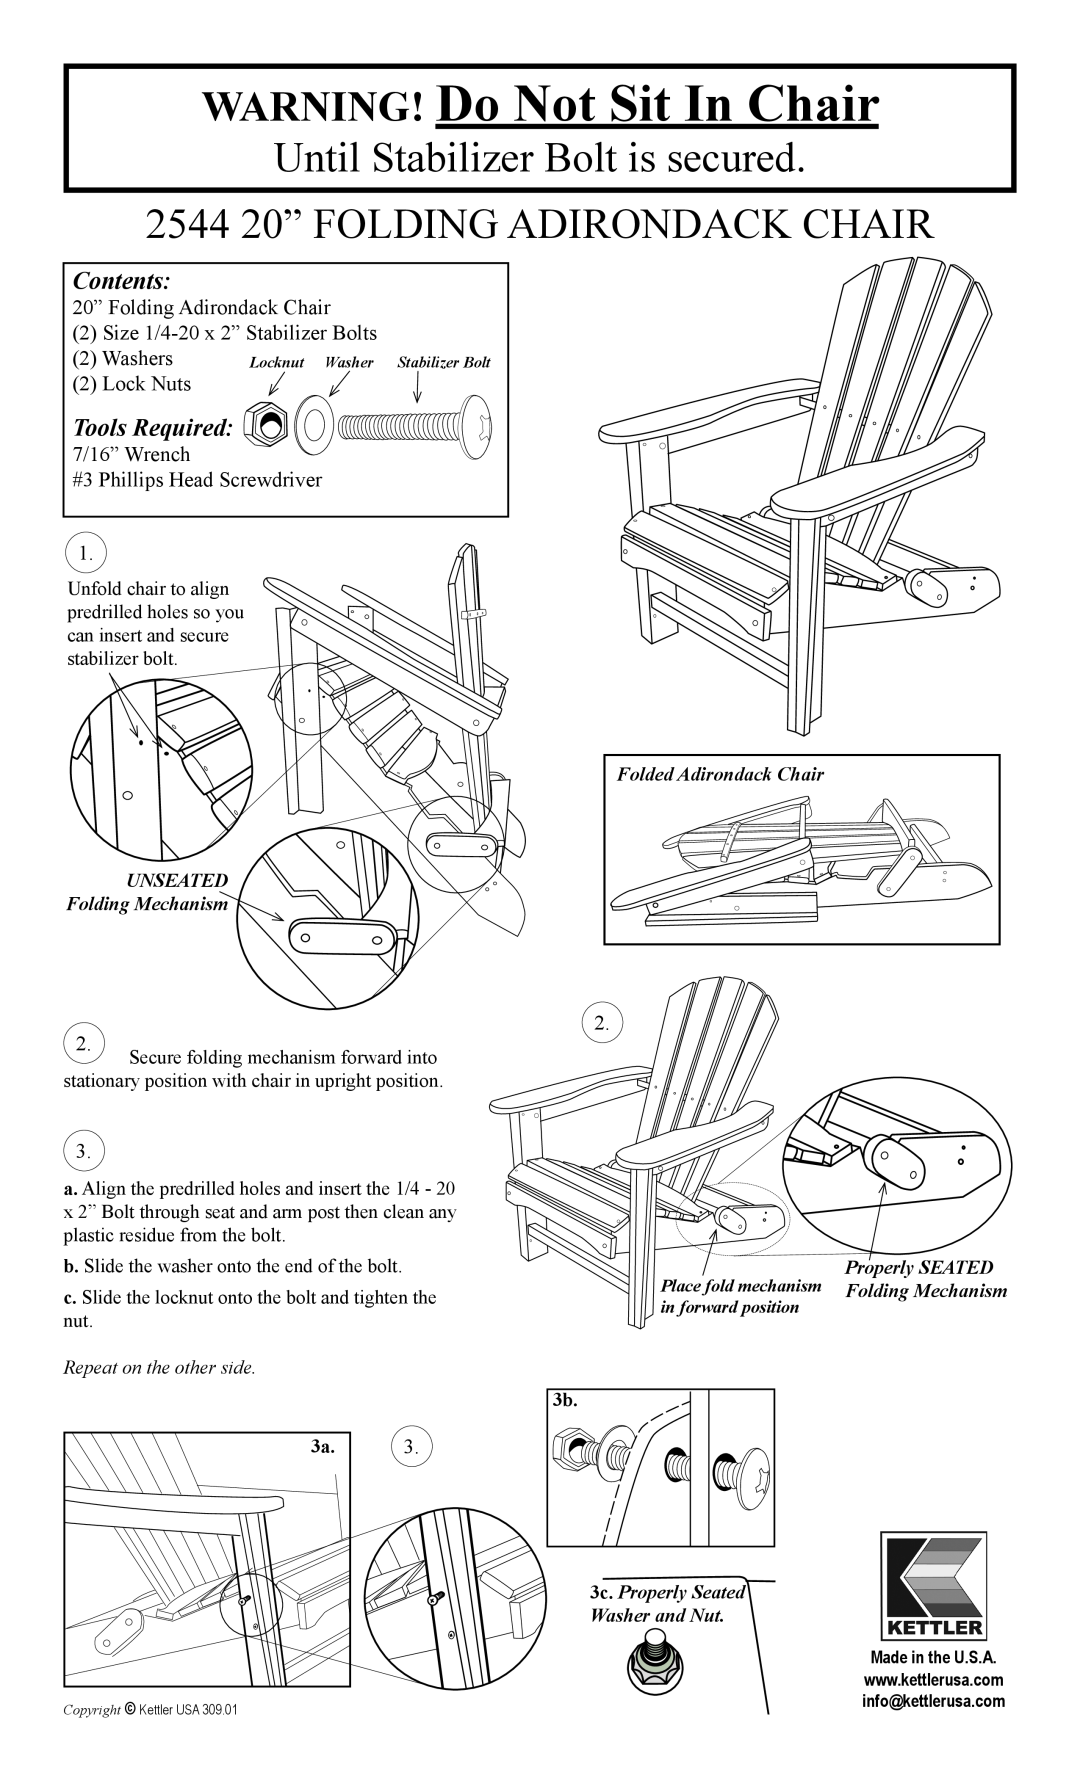 Kettler manual WARNING! Do Not Sit In Chair, Until Stabilizer Bolt is secured, 2544 20” FOLDING ADIRONDACK CHAIR 